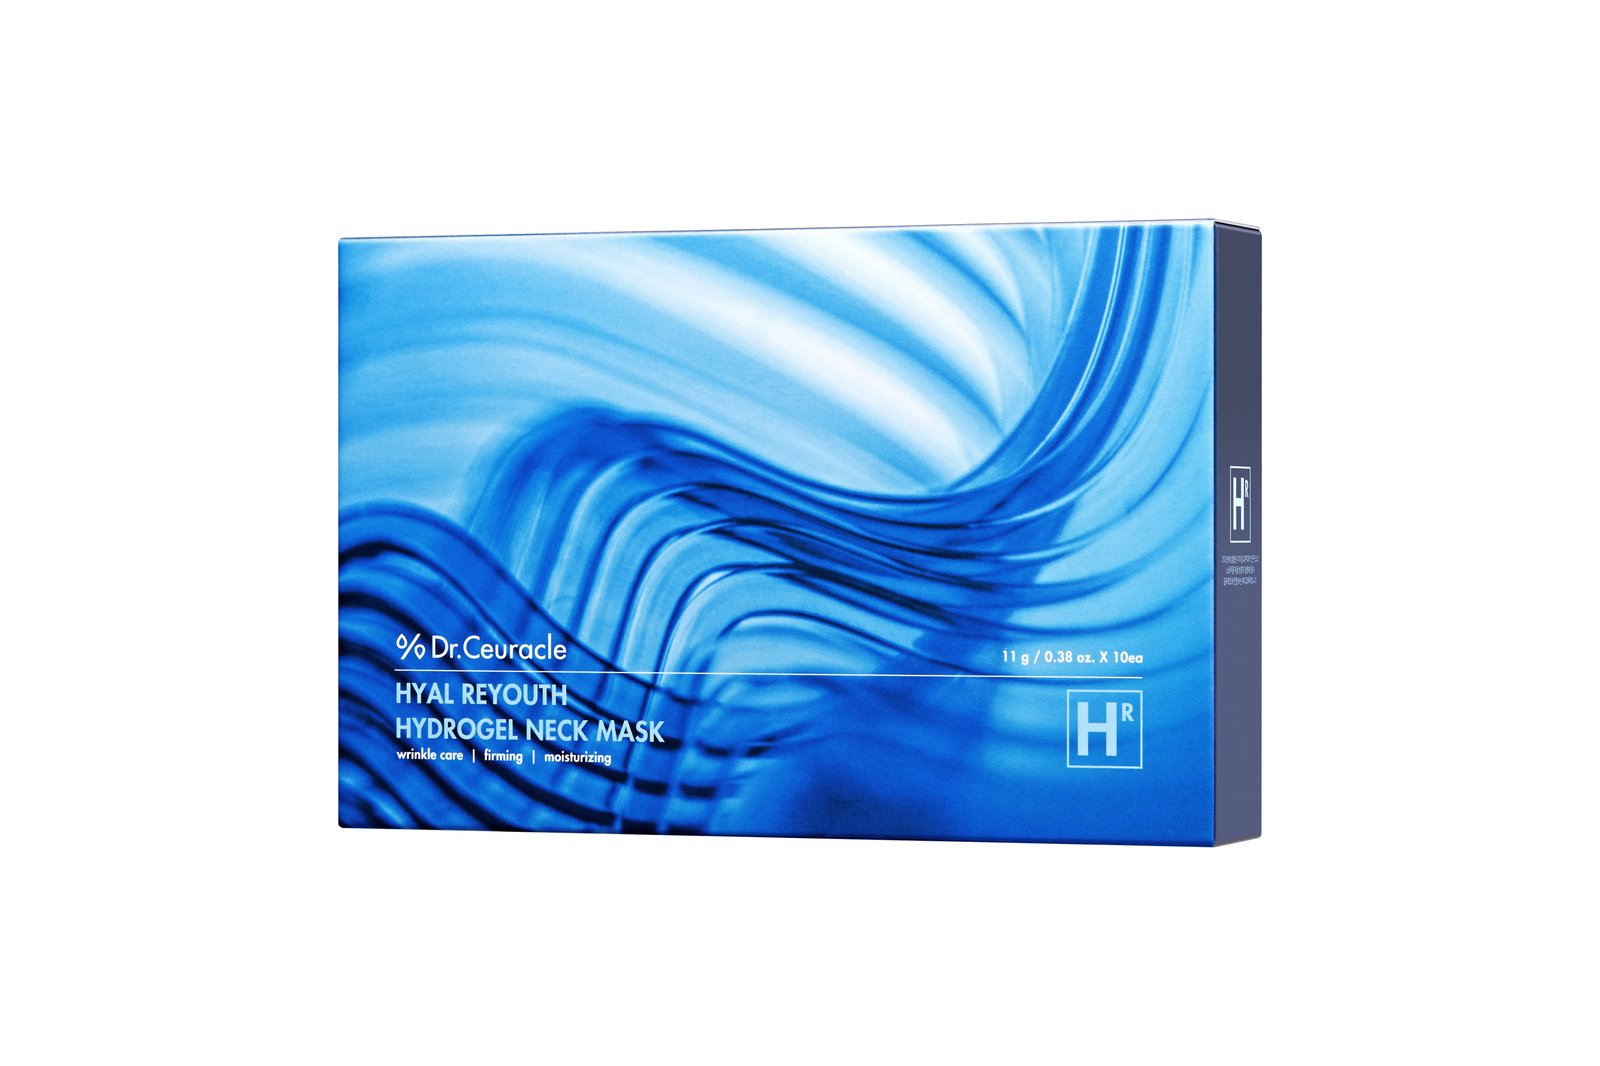 Dr Ceuracle Hyal Reyouth Hydrogel Neck Mask 1st